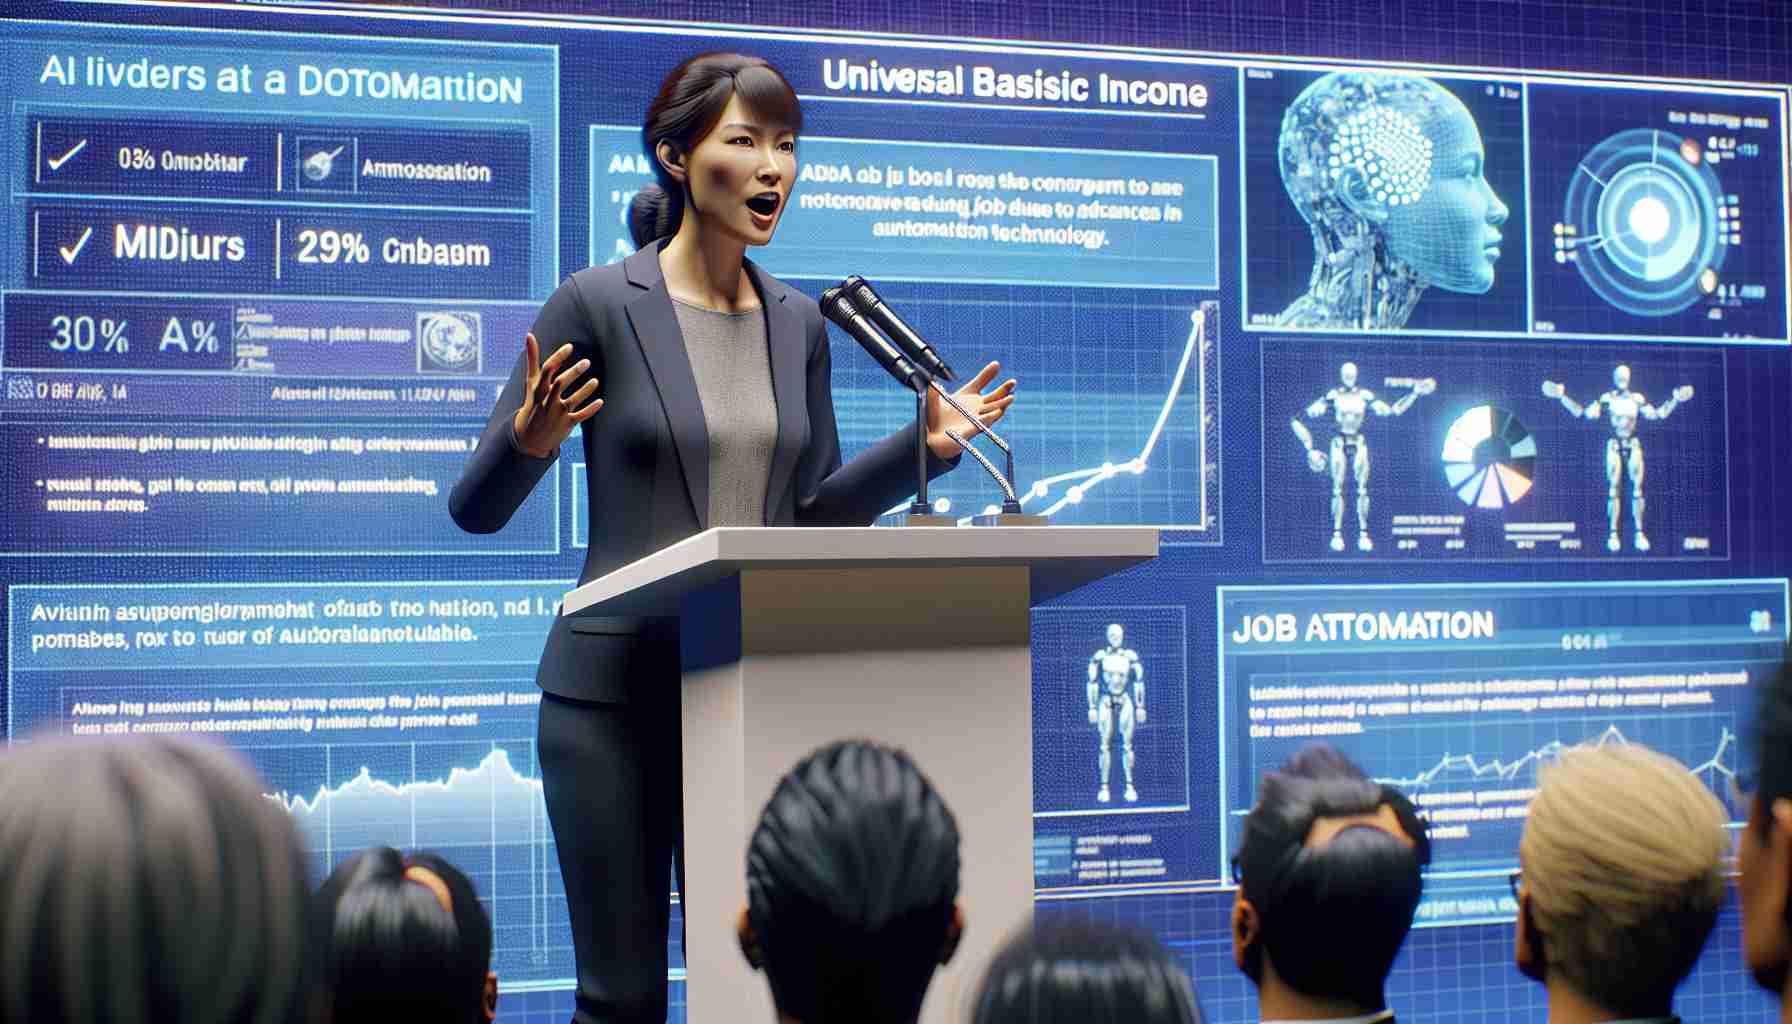 AI Pioneer Advocates for Universal Basic Income to Counter Job Loss Due to Automation